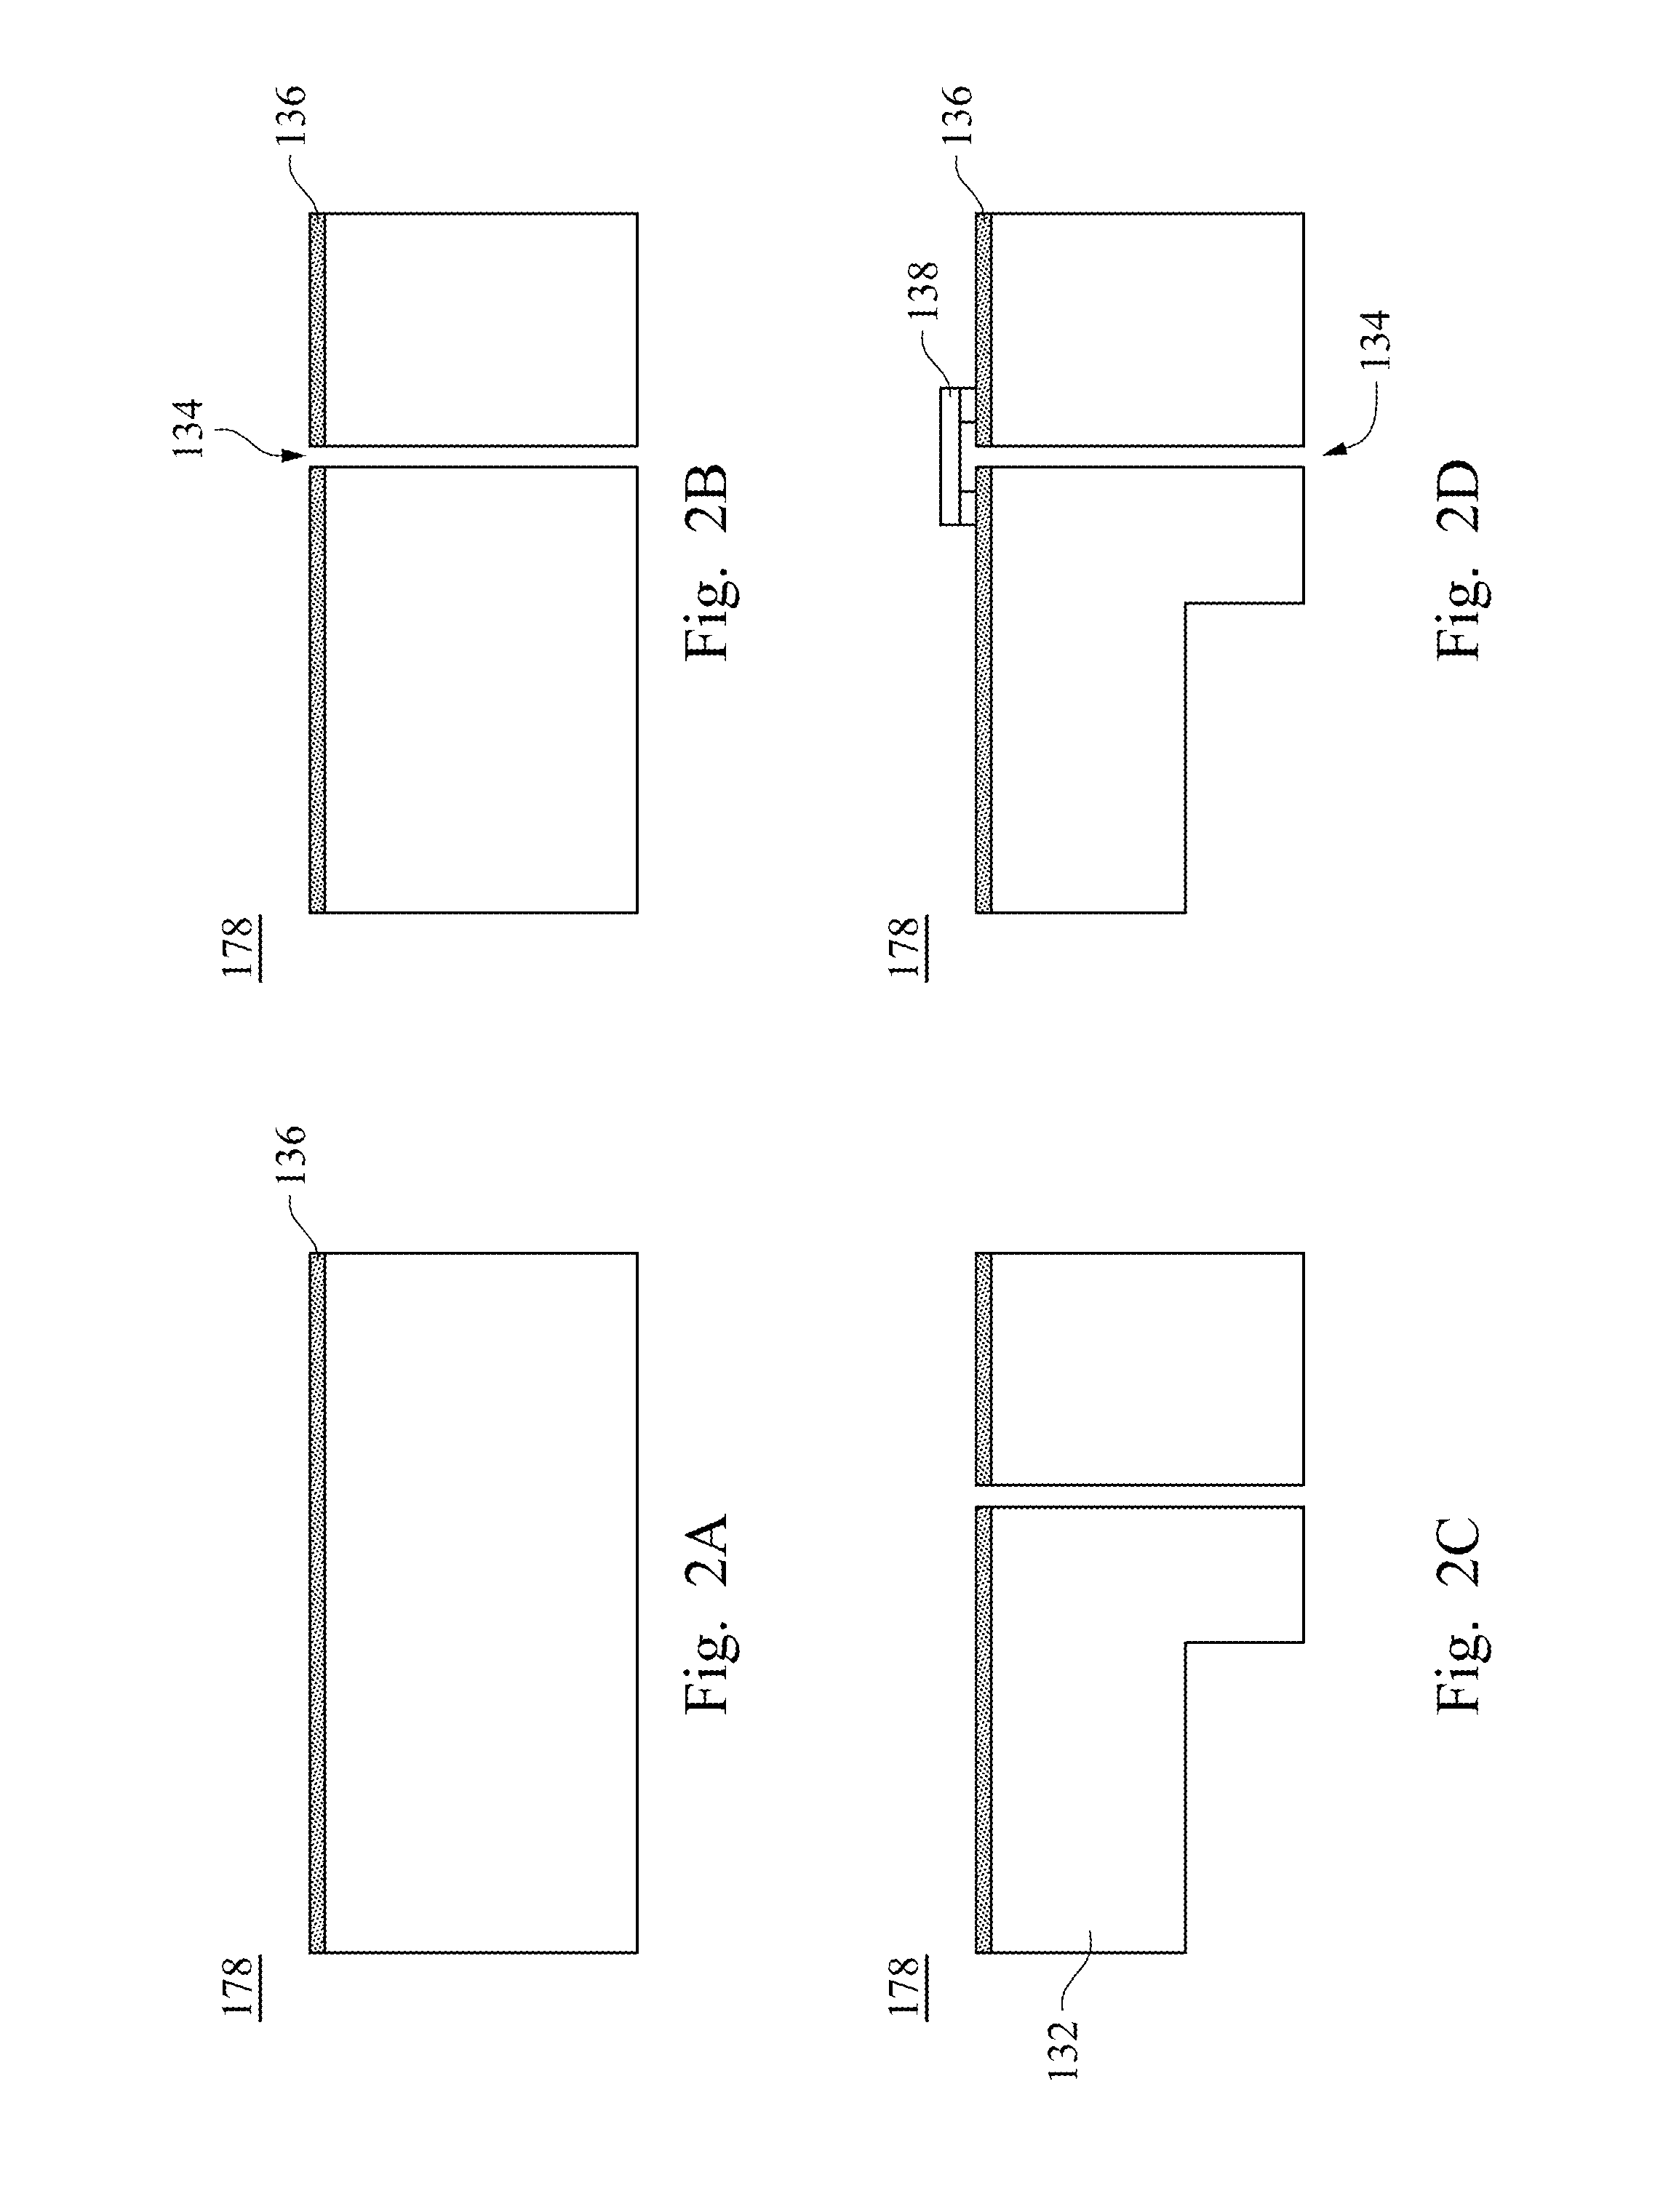 Opto-electronic circuit board and method for assembling the same